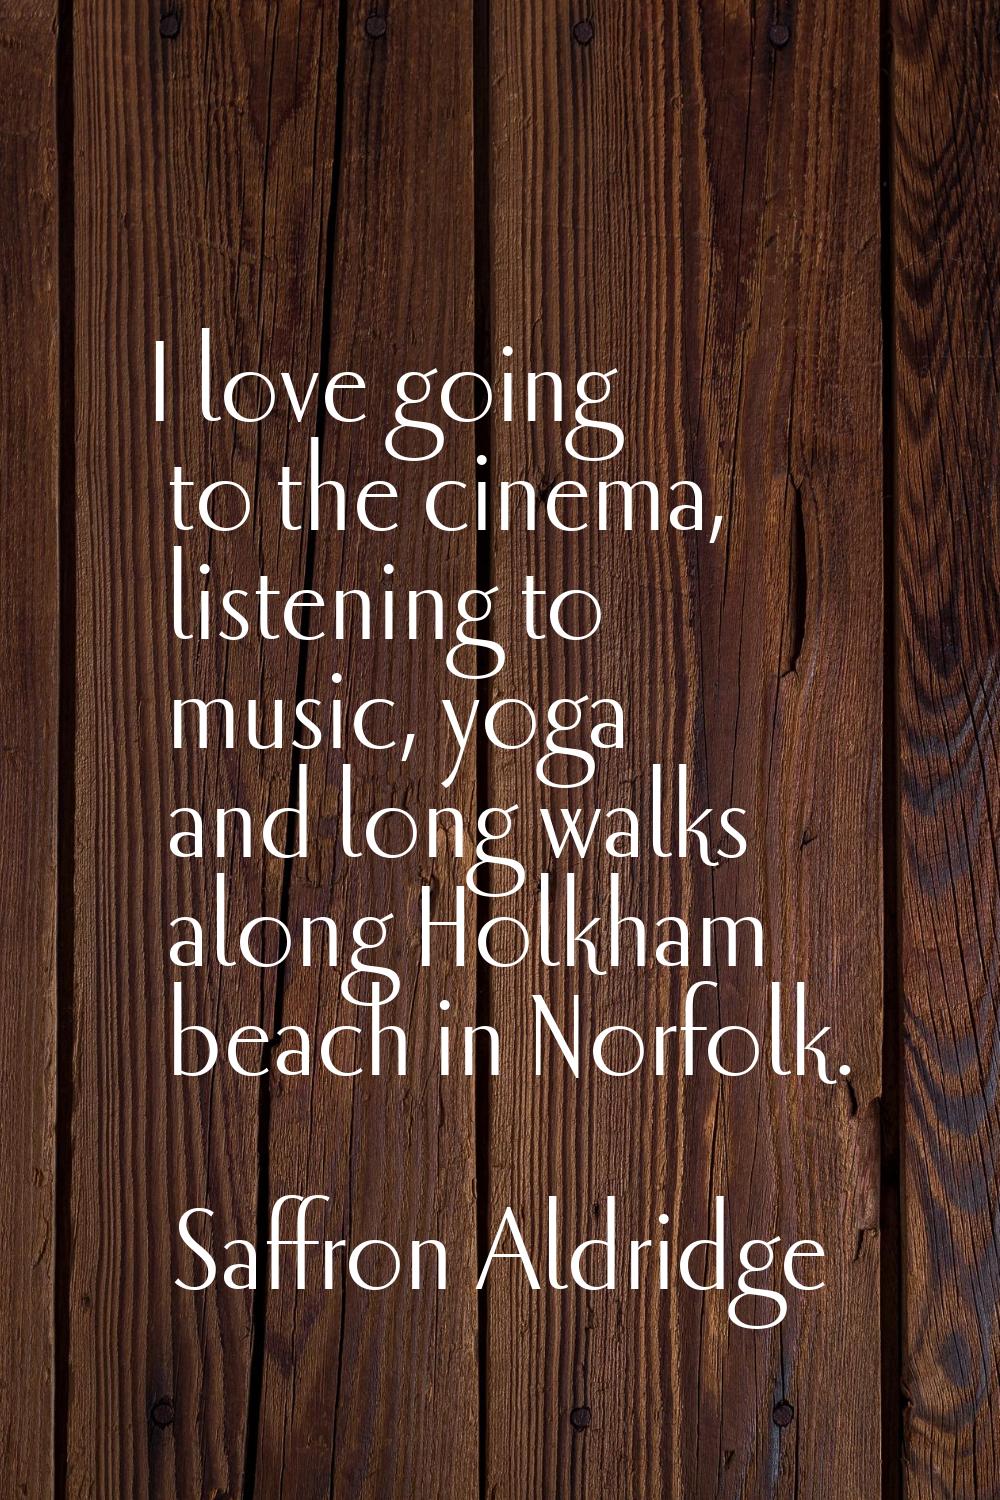 I love going to the cinema, listening to music, yoga and long walks along Holkham beach in Norfolk.